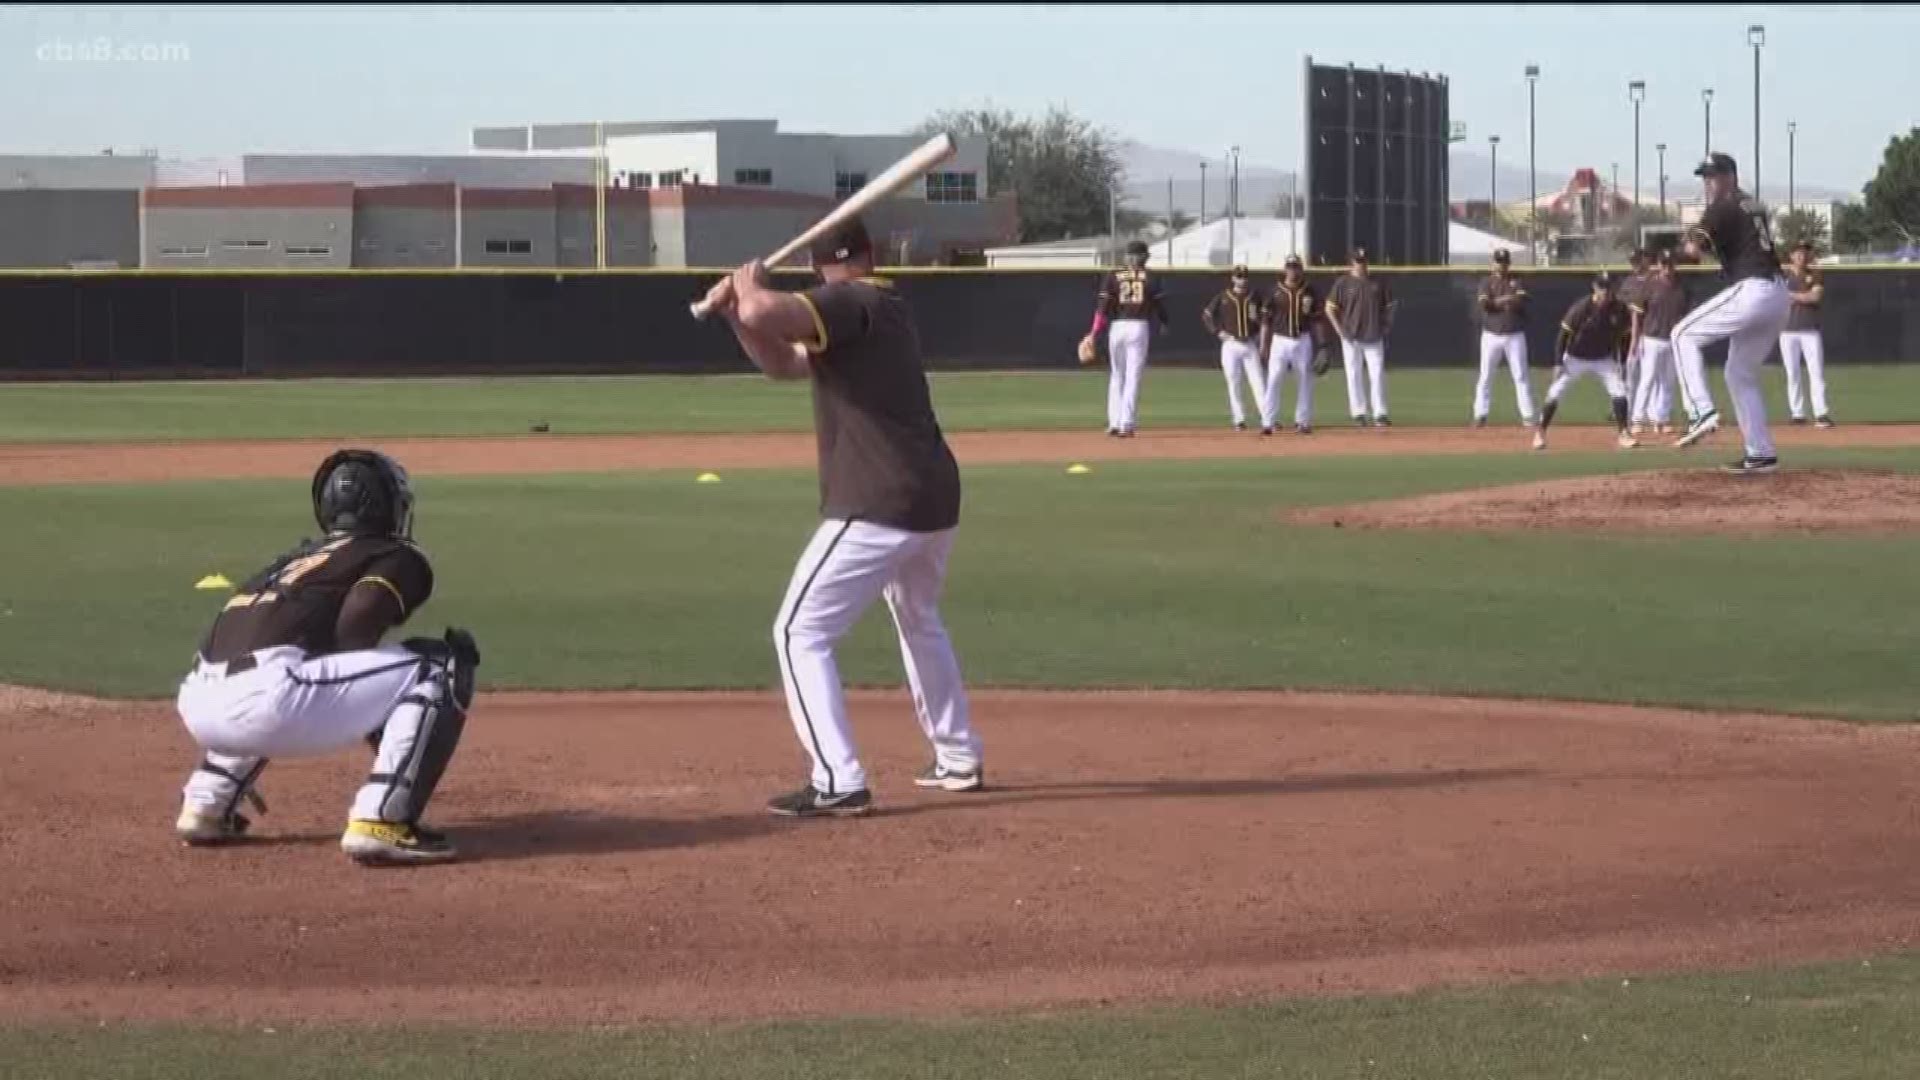 News 8 went on the road to check out the Padres during Spring Training.